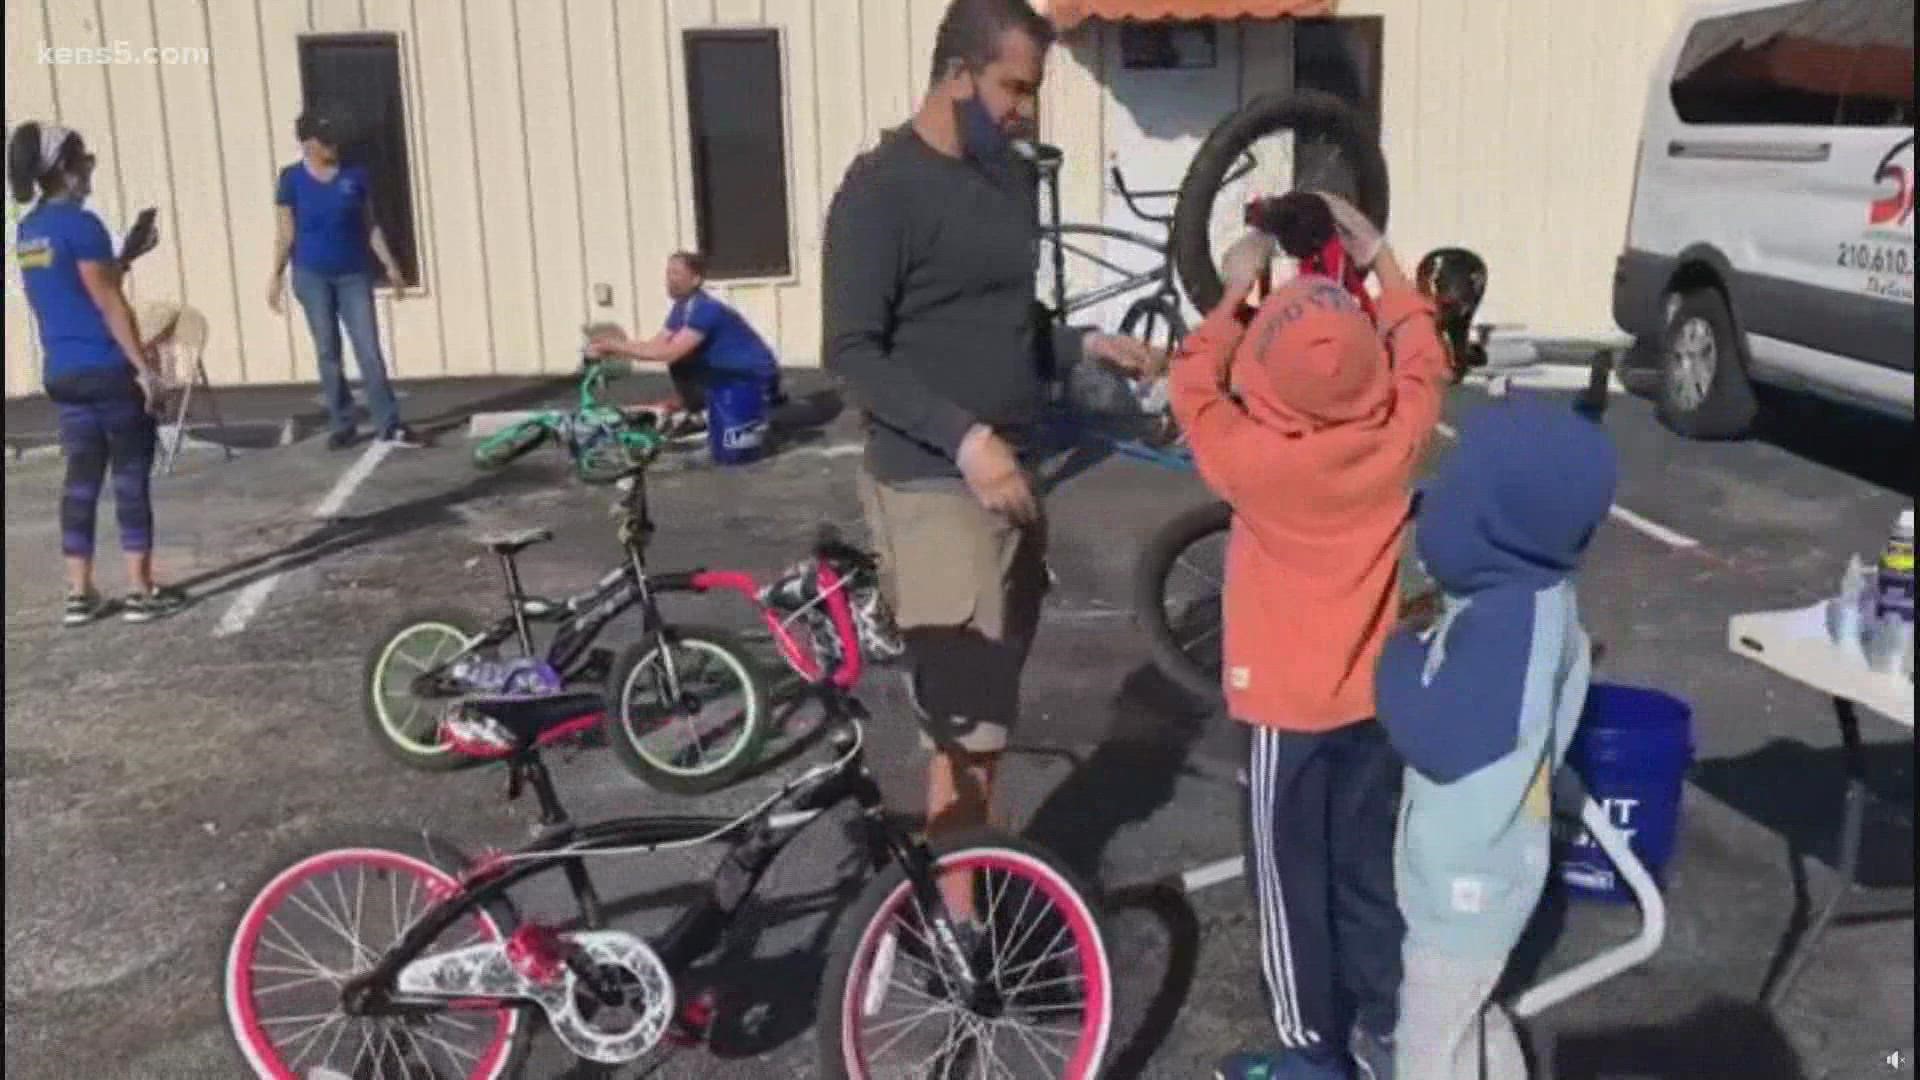 18 volunteers are needed for the Earn-A-Bike program this Saturday.